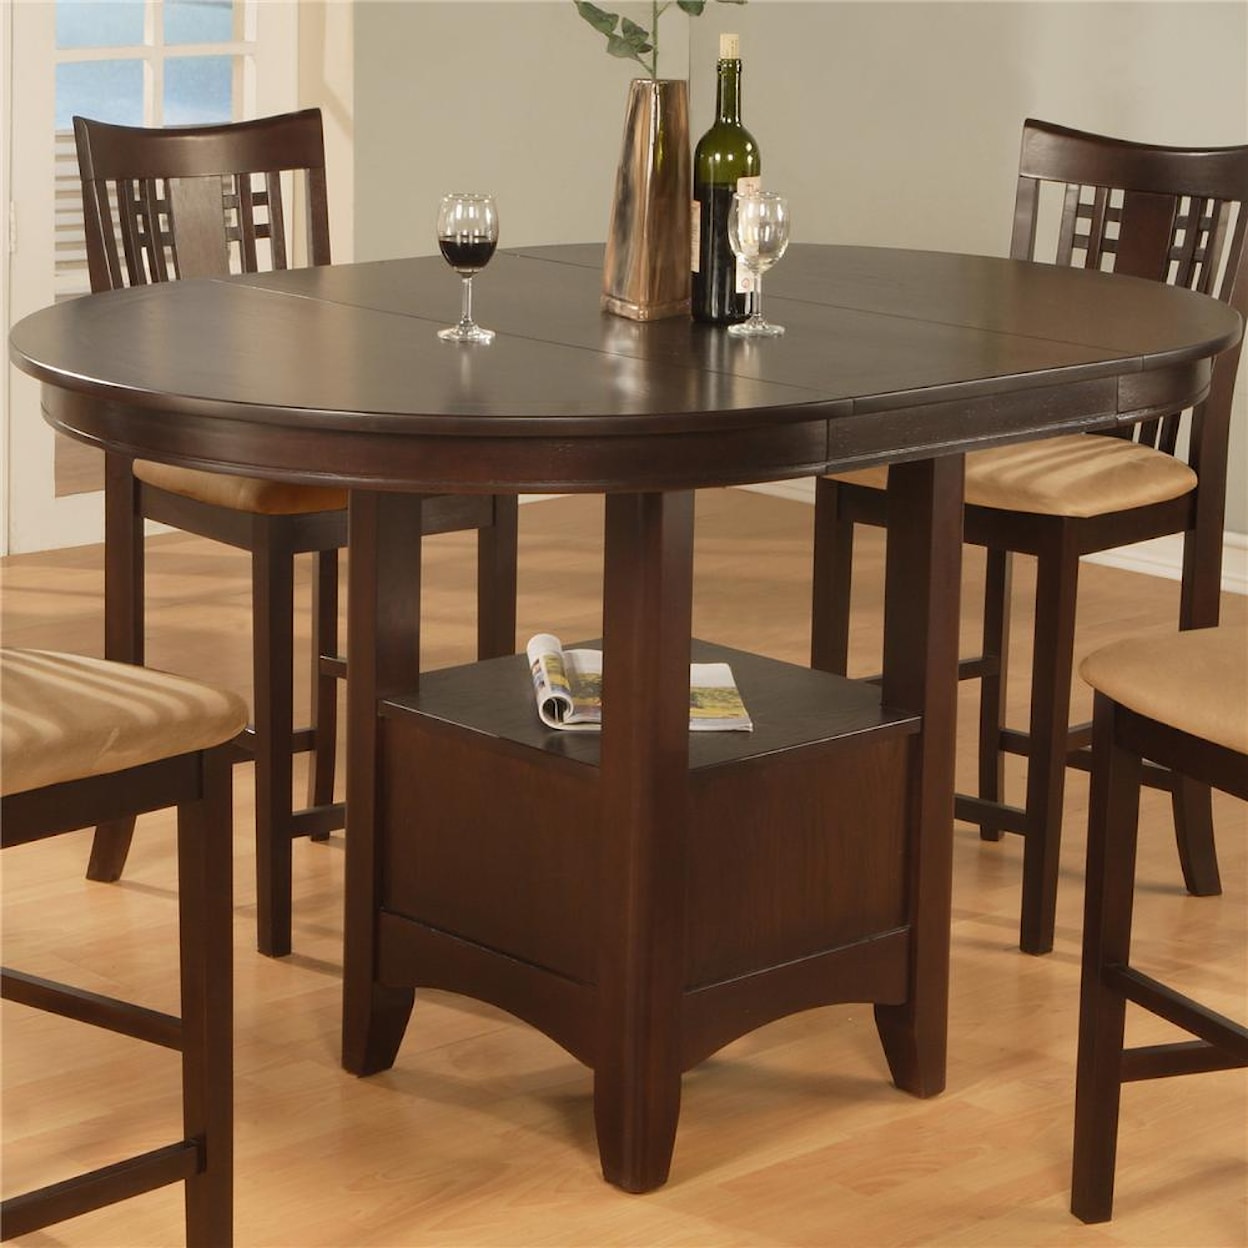 Primo International 956 Counter Dining Table